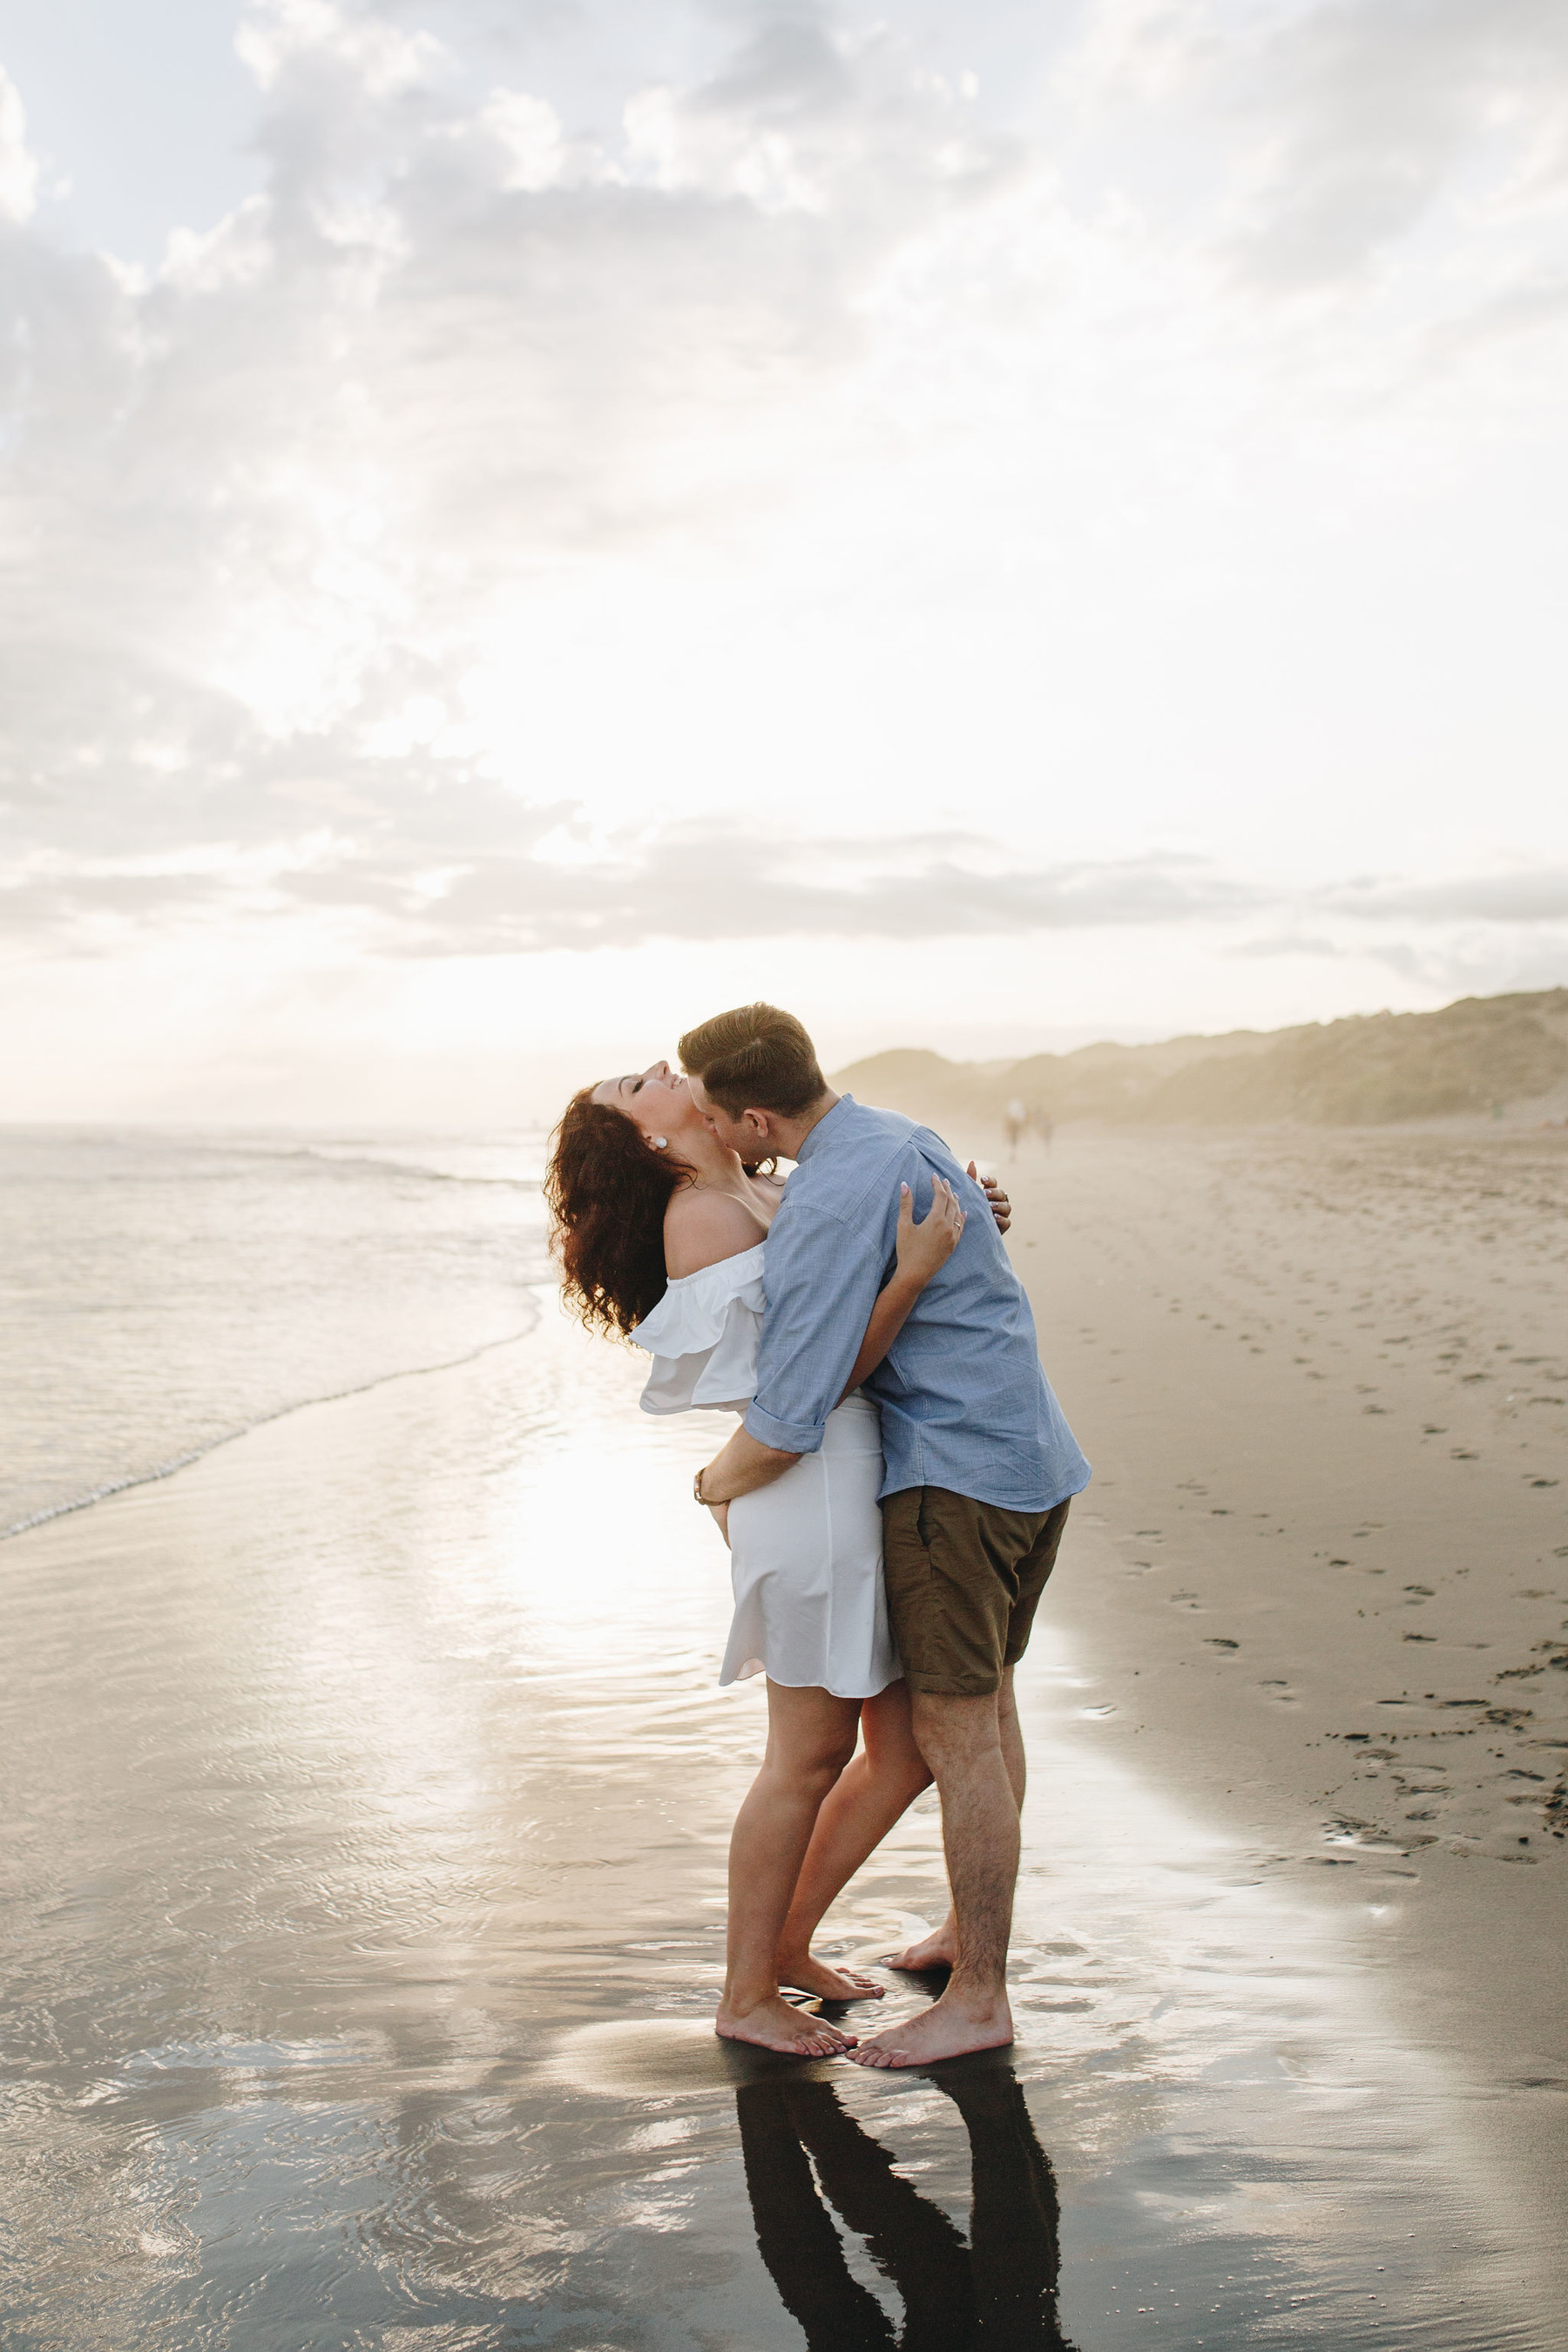 Love Story photo set on the beach in Marbella